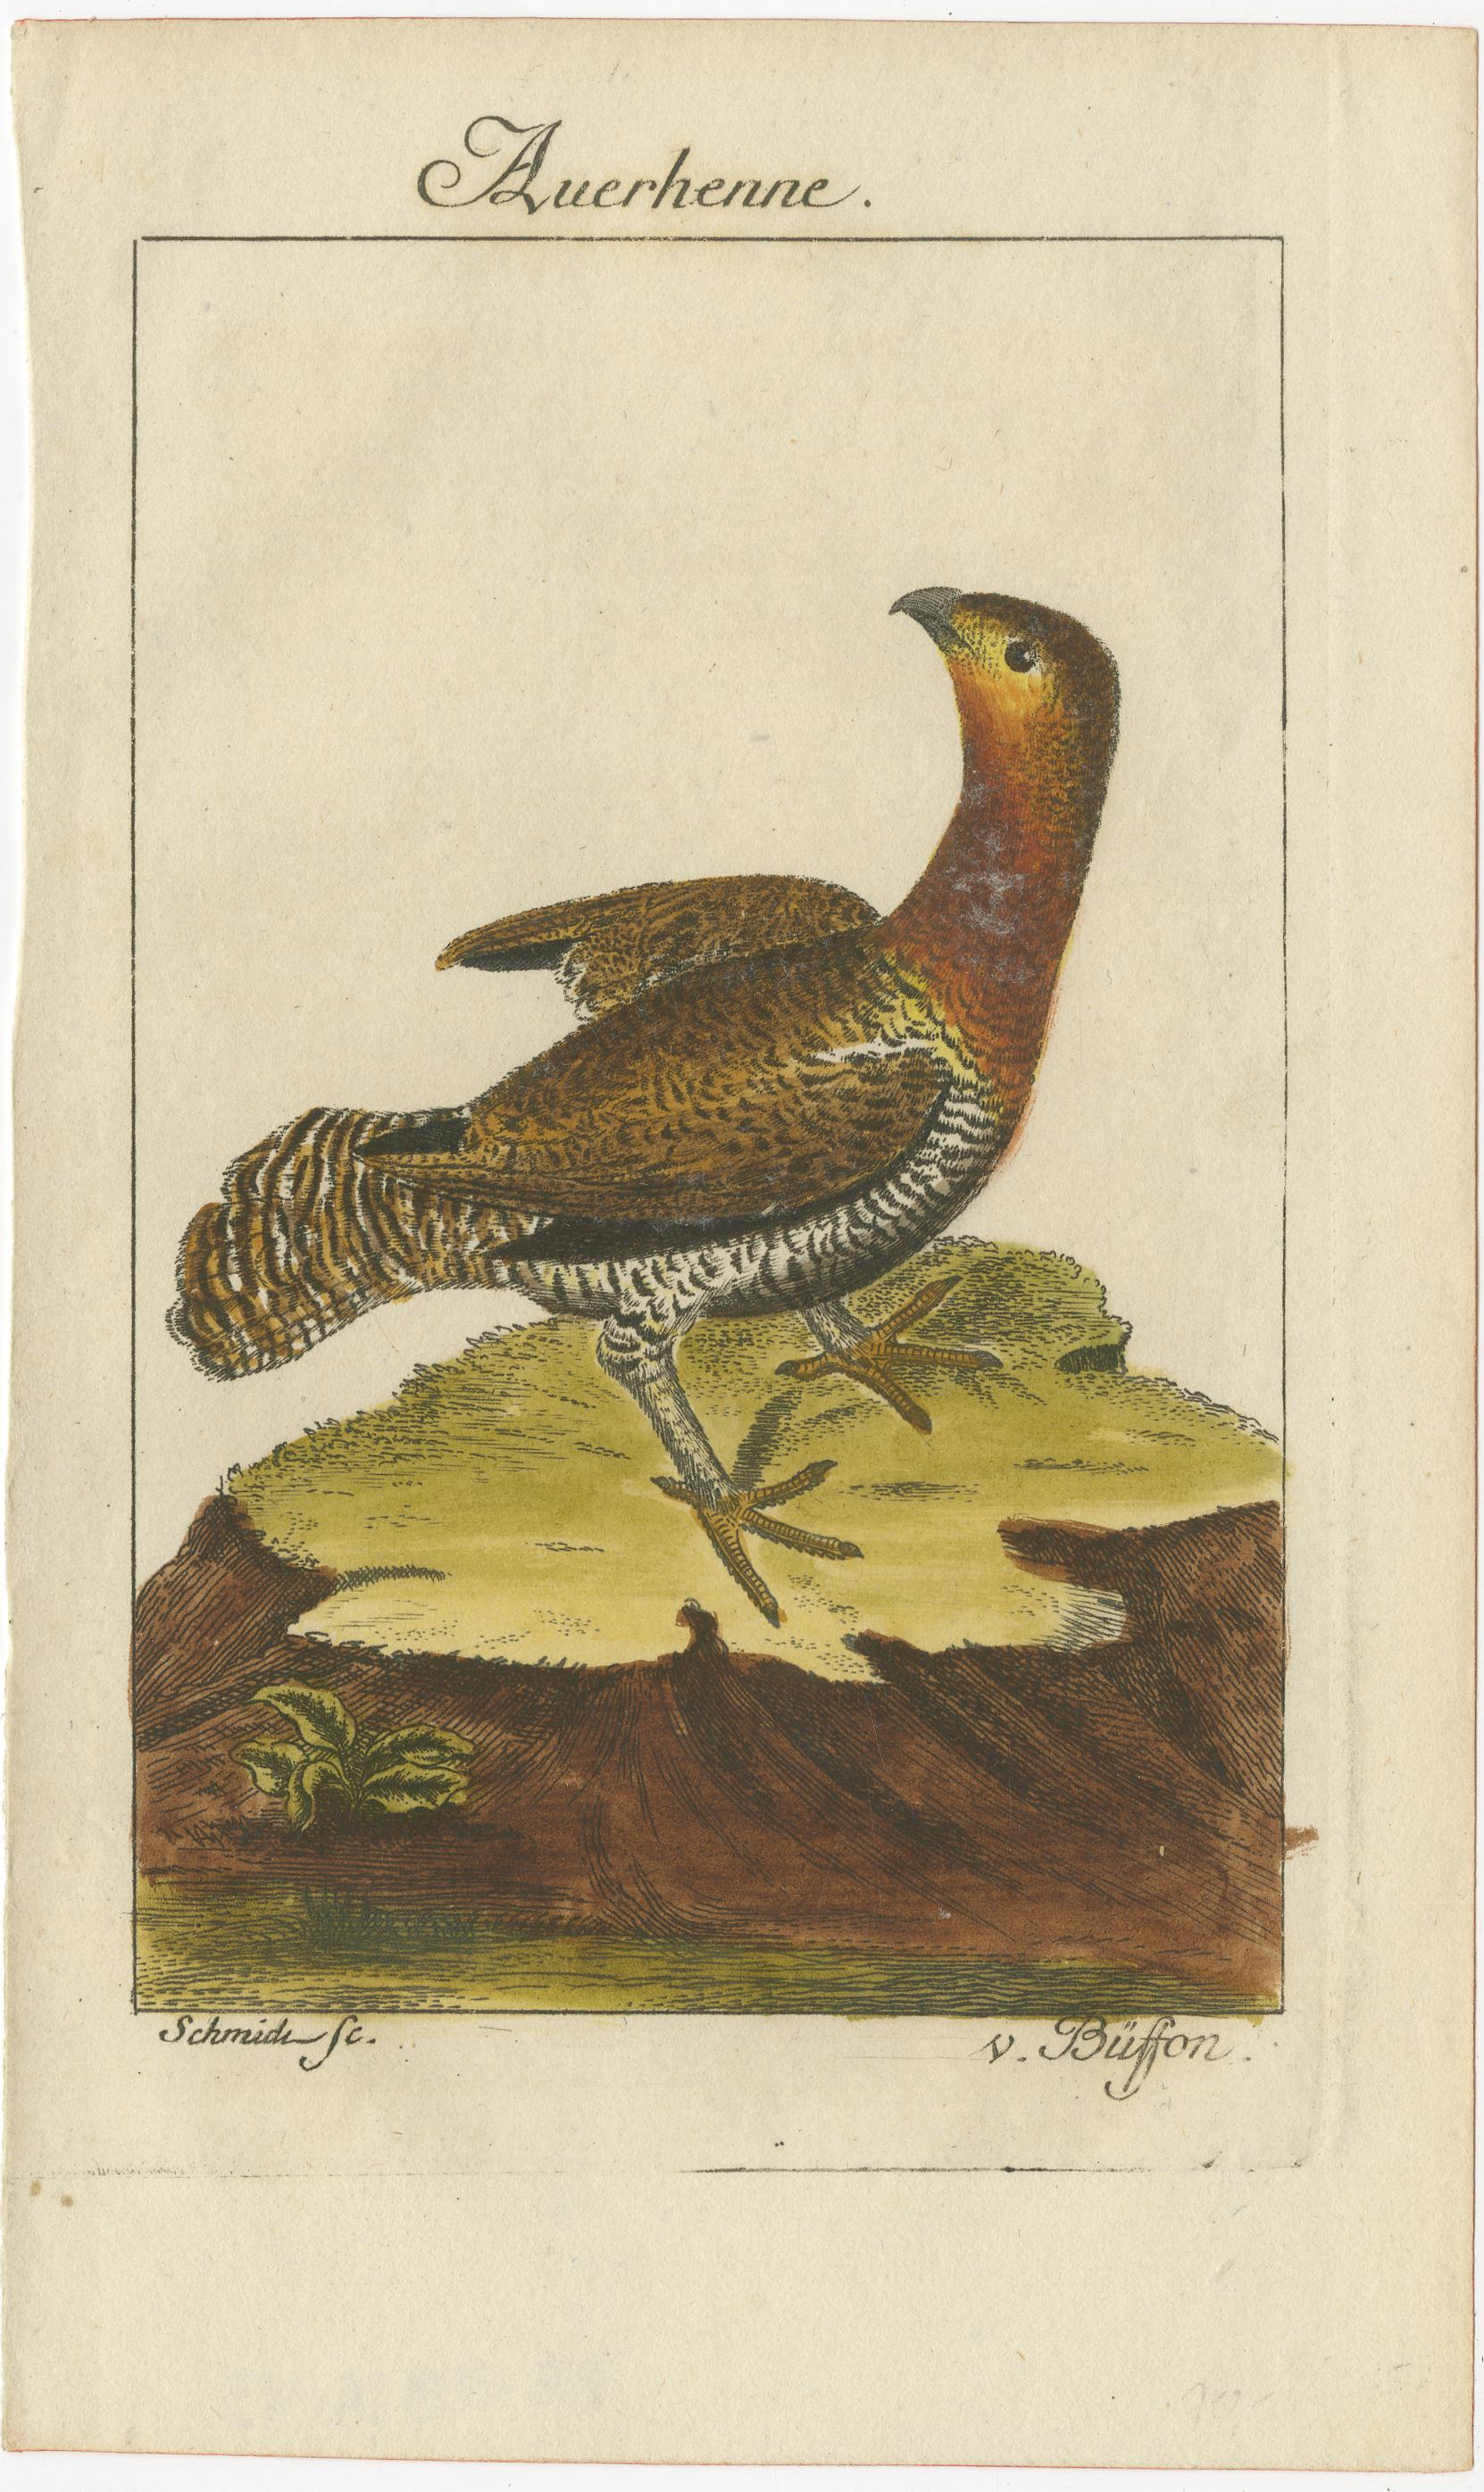 Antique bird print titled 'Auerhenne'. Hand colored original antique print of a Western capercaillie hen, also known as the Eurasian capercaillie, wood grouse, heather cock, cock-of-the-woods, or simply capercaillie, a heavy member of the grouse